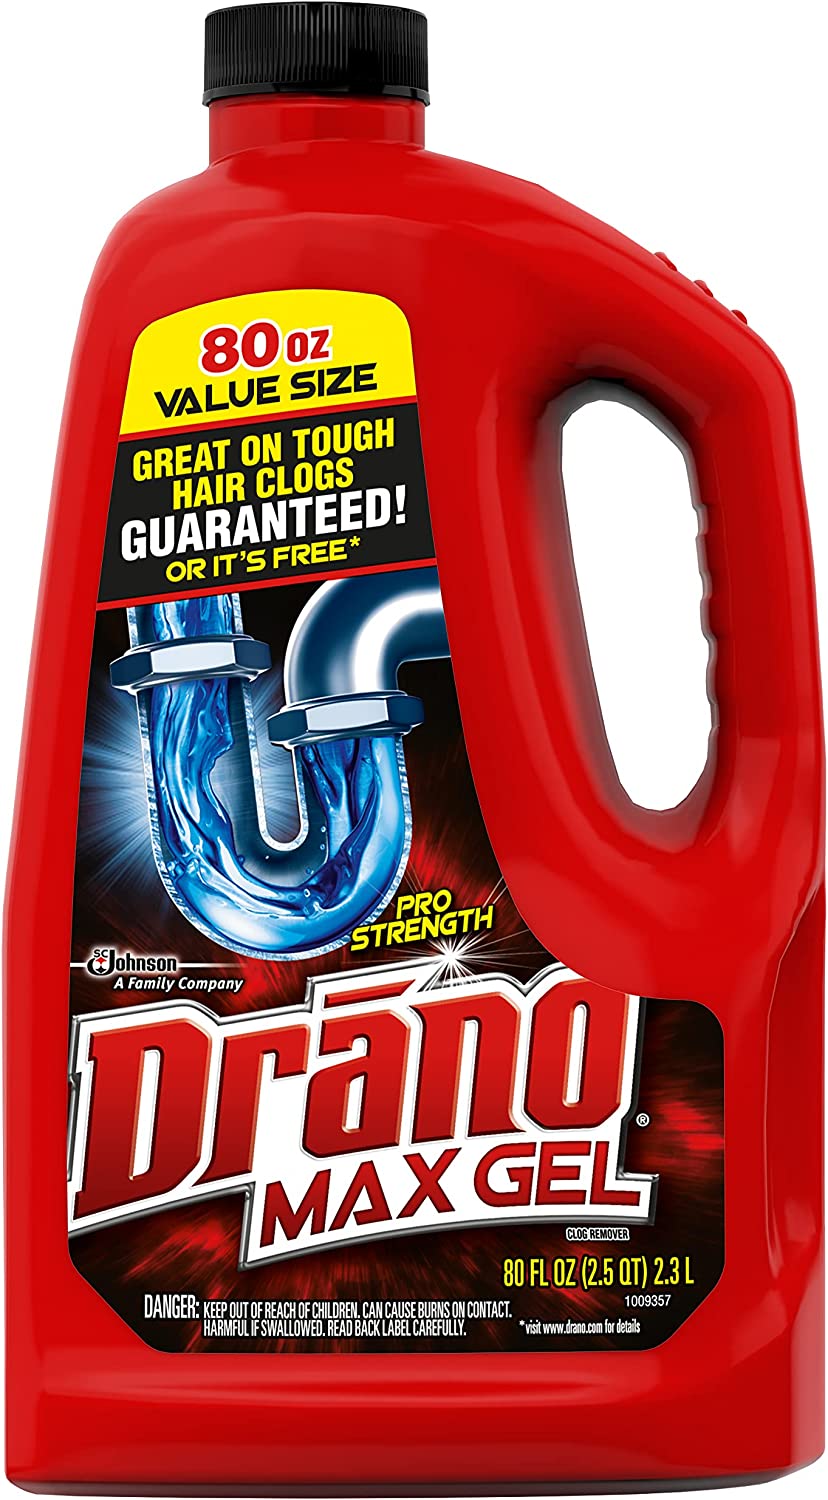 Review of - Drano Max Gel Drain Clog Remover and Cleaner